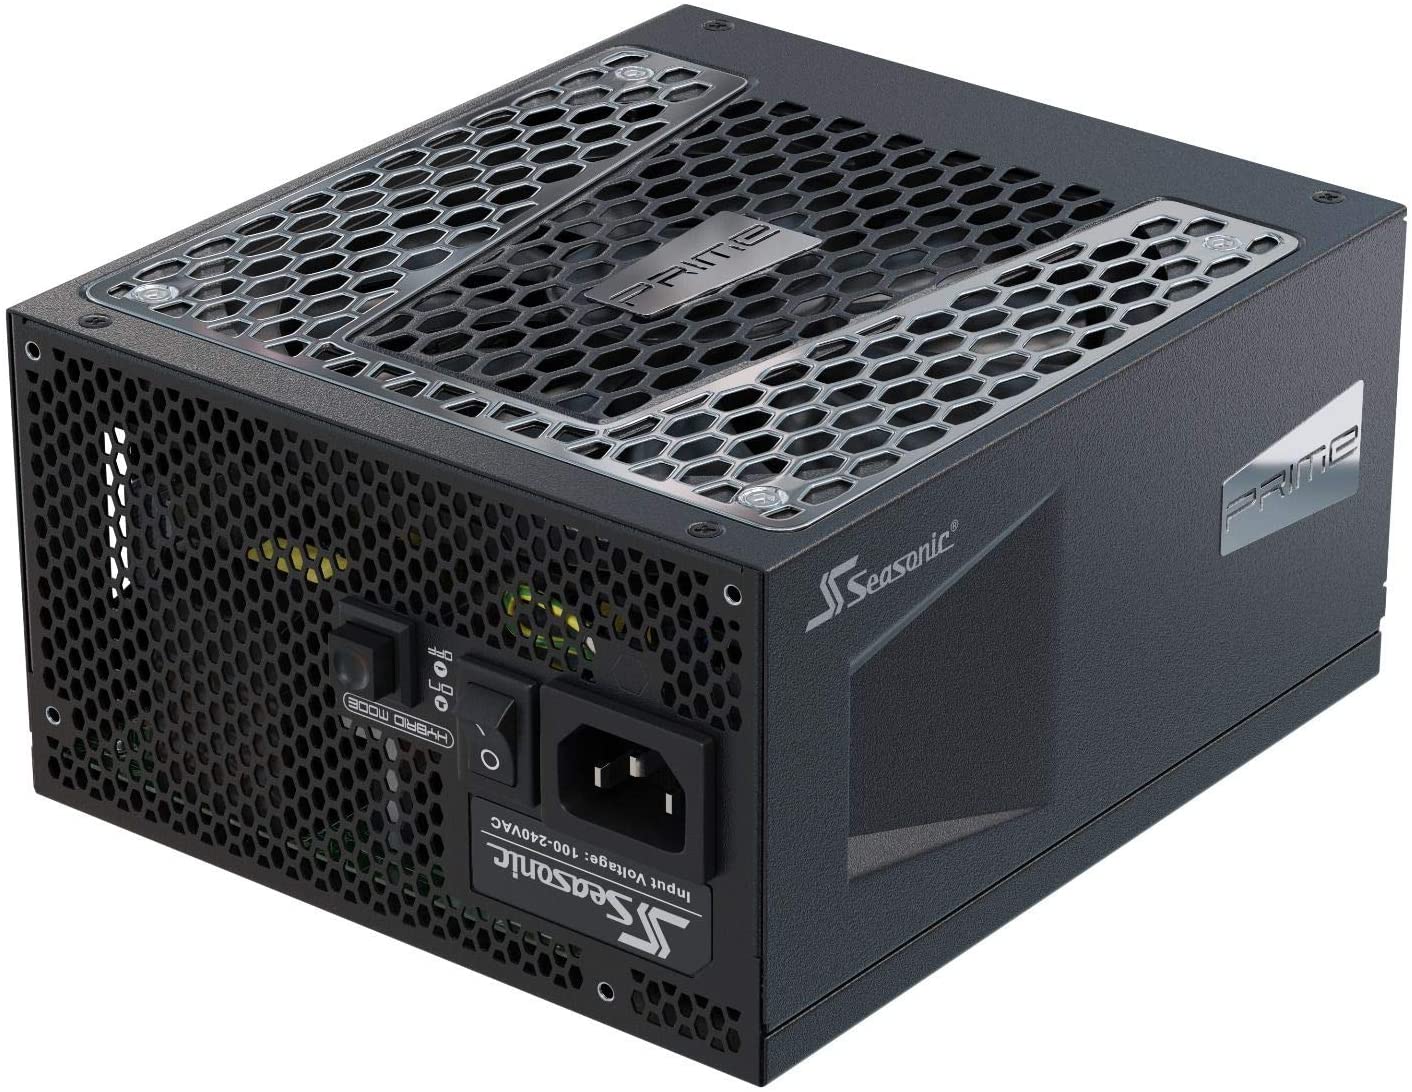 Seasonic PRIME GX-850, 850W 80+ Gold, Full Modular, Fan Control in Fanless, Silent, and Cooling Mode